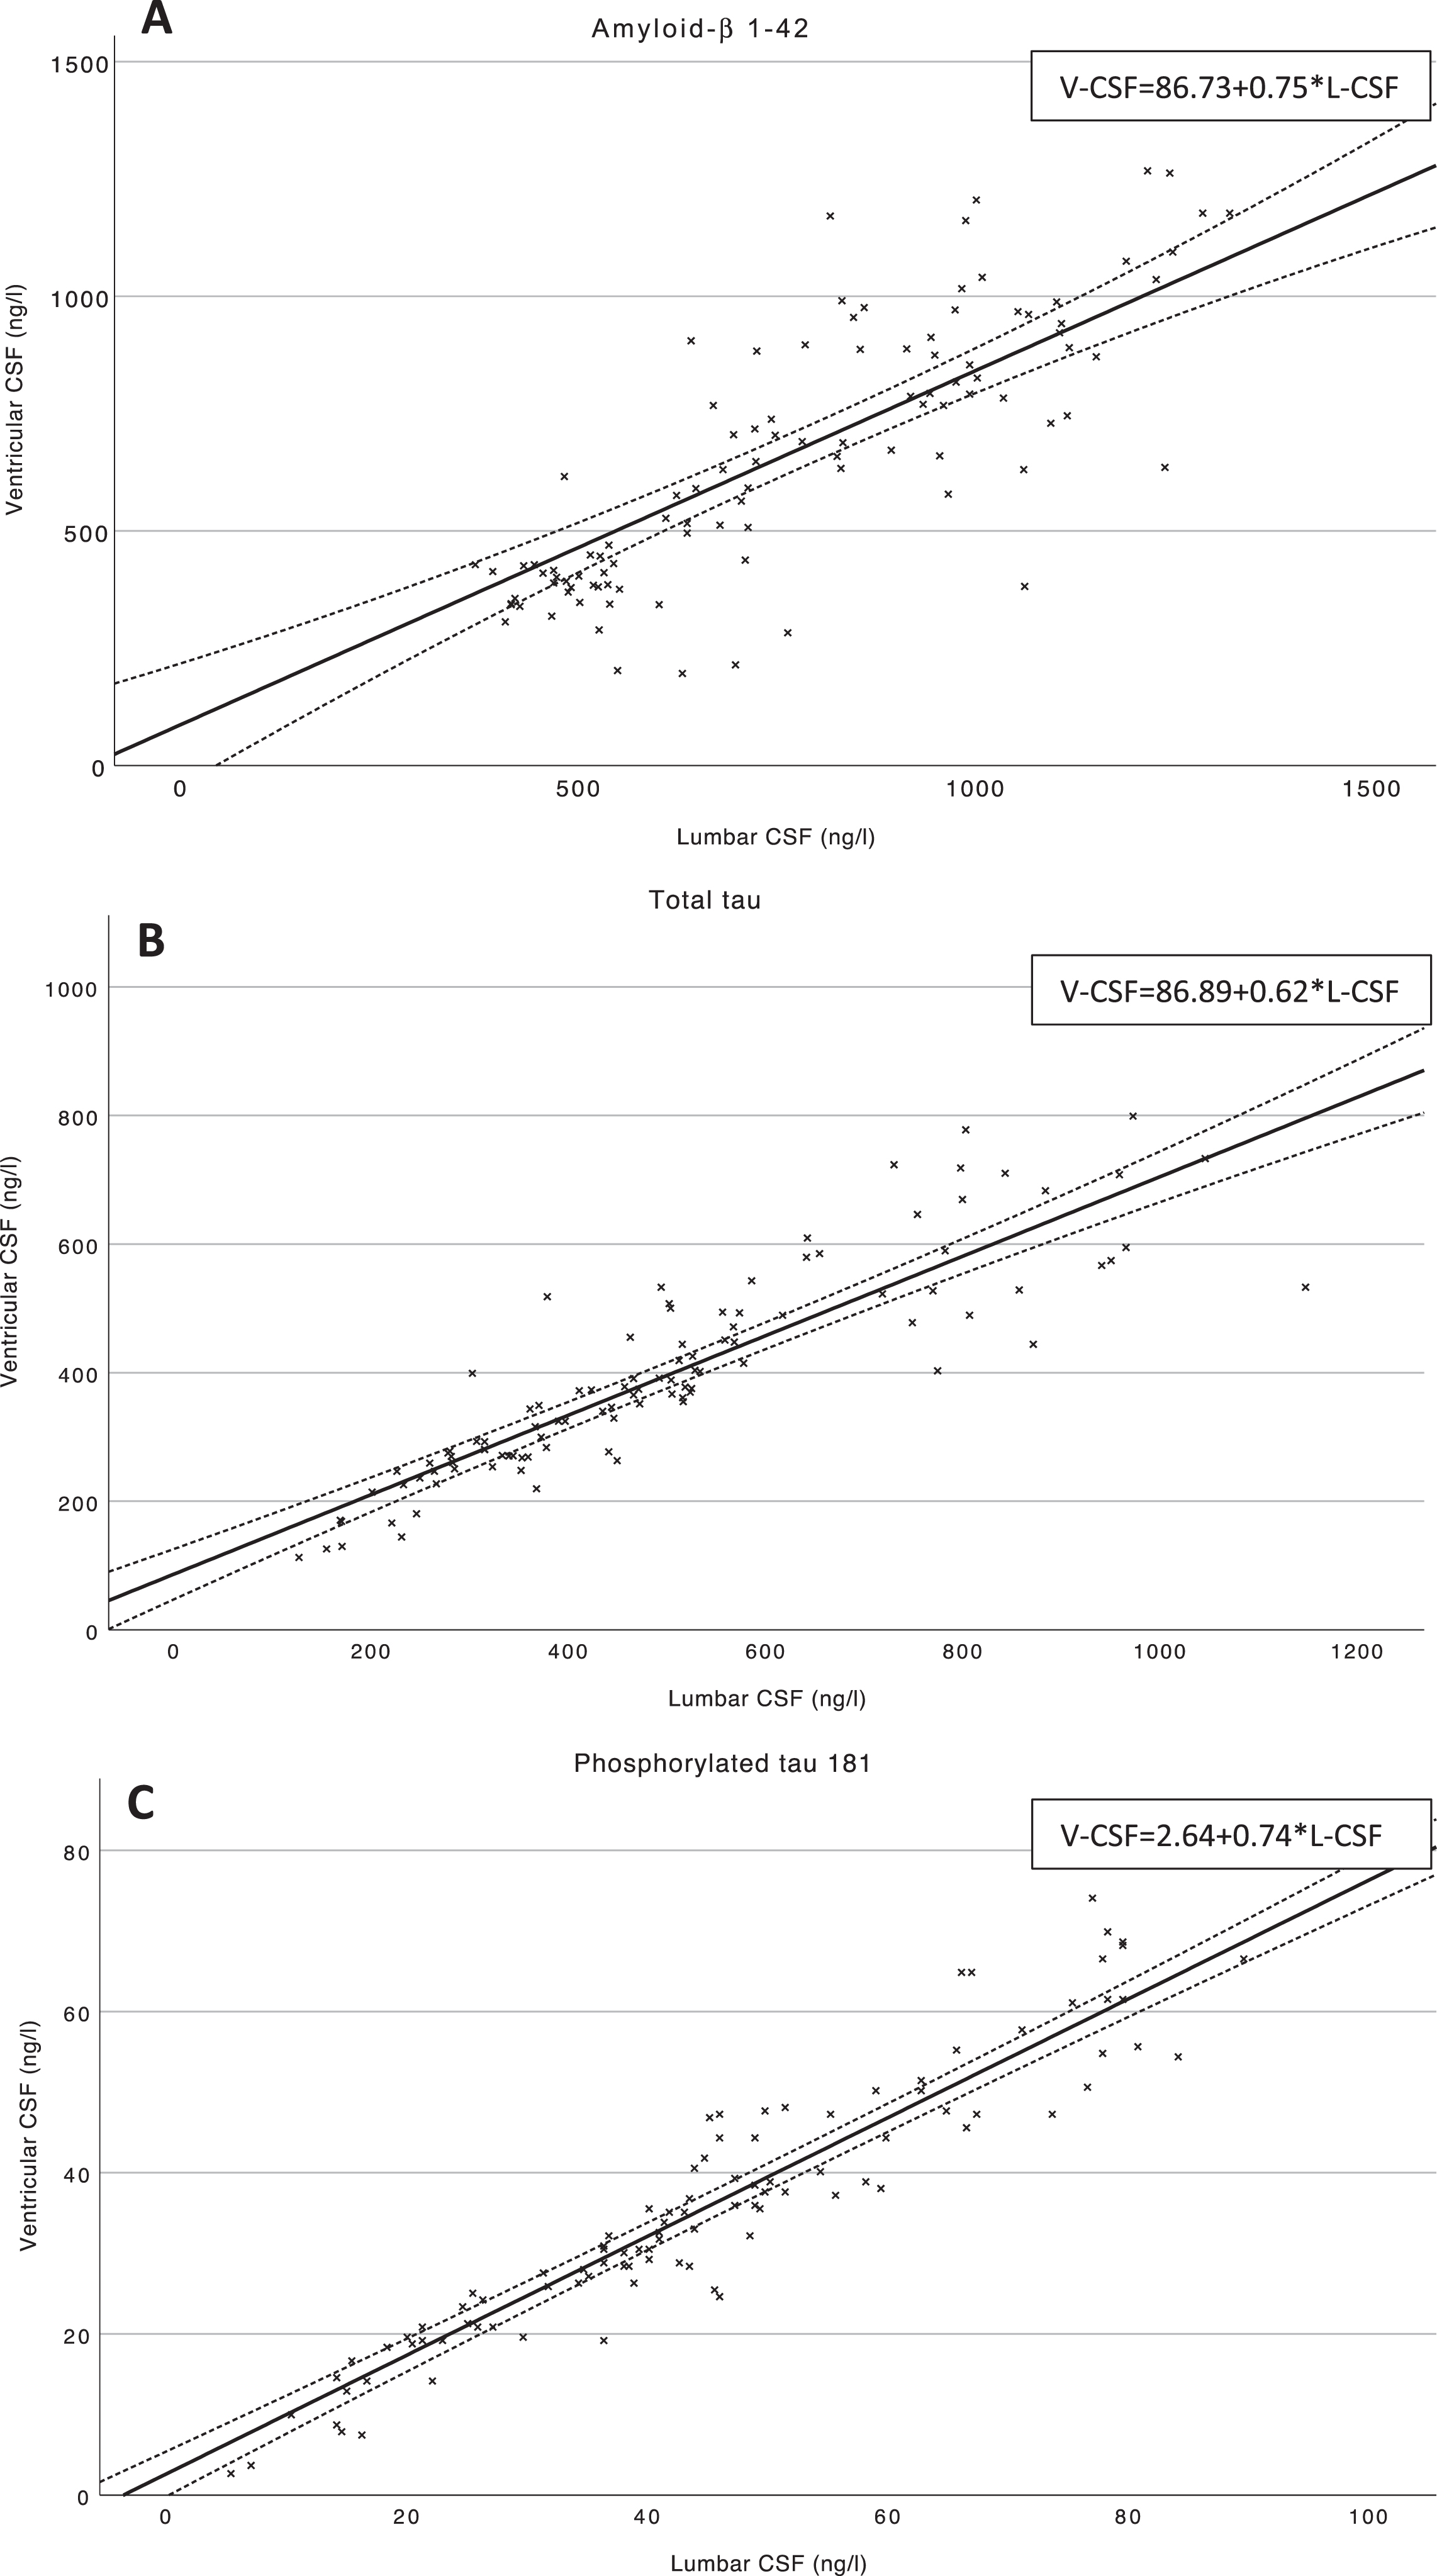 Scatterplots of postoperative Aβ42, T-tau, and P-tau181 in V- and L-CSF. Scatterplots of V- and L-CSF values of the biomarkers Aβ42 (A), T-tau (B), and P-tau181 (C) and linear trendlines are illustrating the linear dependency of postoperative V- and L-CSF. Mean confidence intervals (95%) are drawn for linear trendlines. Regression equations of the linear mixed effects models are presented at upper right corner of the figure. Aβ42, amyloid-β 1-42; T-tau, total tau protein; P-Tau181, hyperphosphorylated tau at threonine 181; V-CSF, ventricular cerebrospinal fluid; L-CSF, lumbar cerebrospinal fluid.